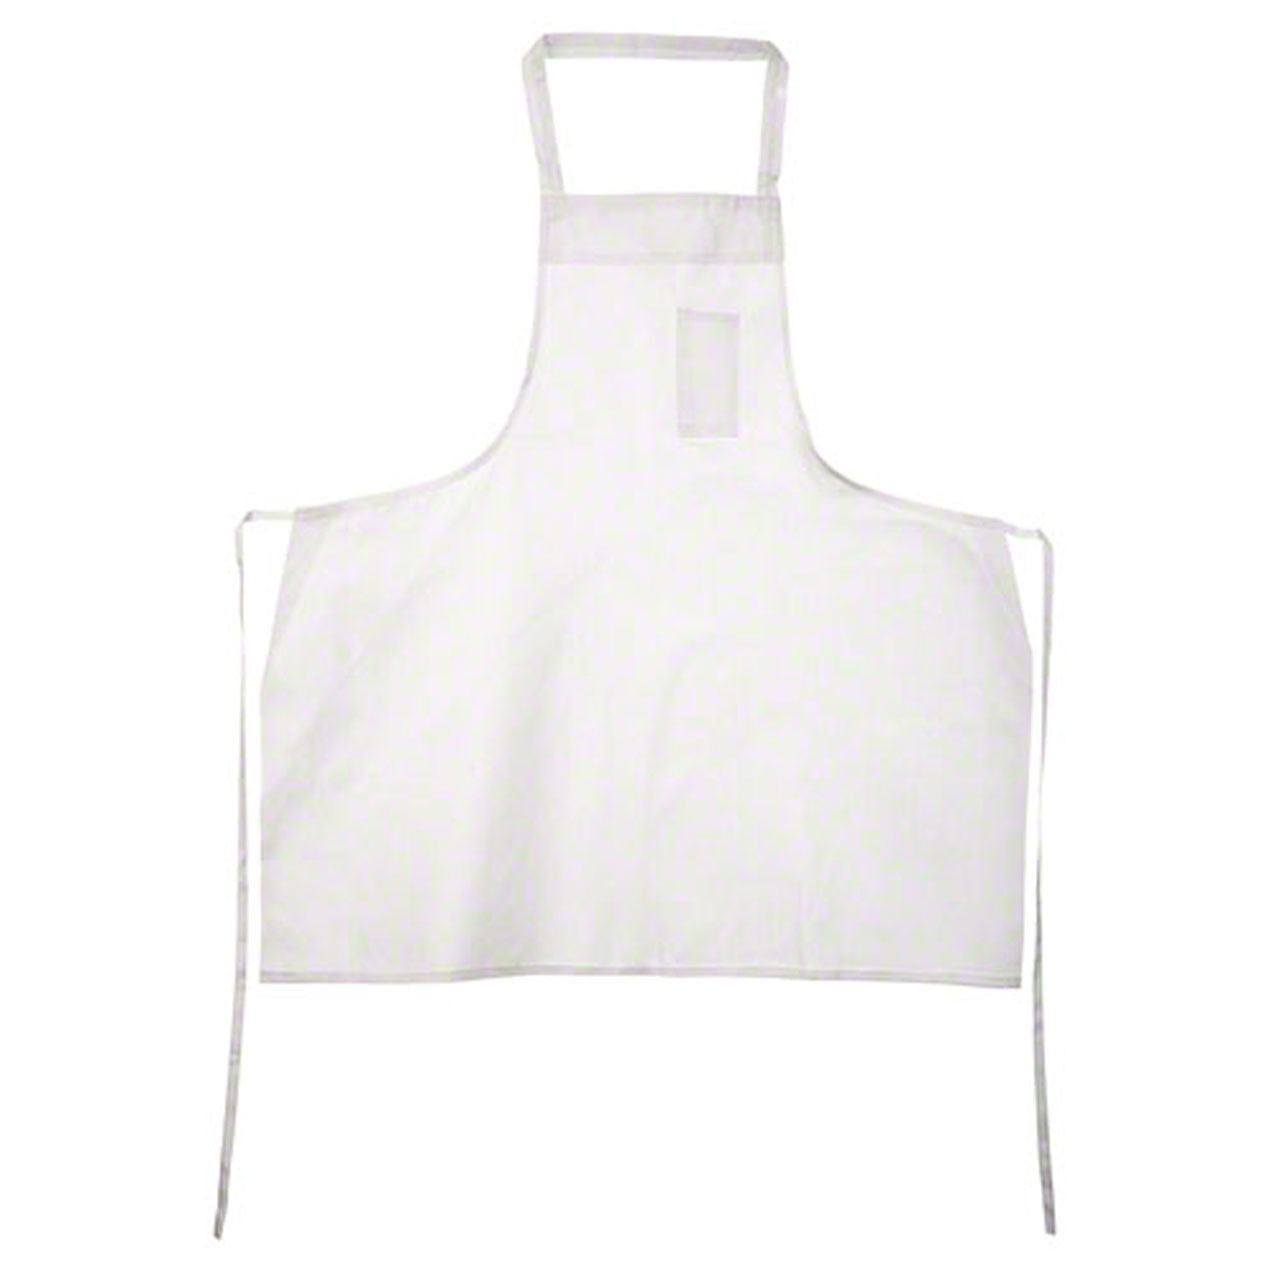 What type of weave is utilized in these cheap white aprons, known as White Economy Bib Aprons?